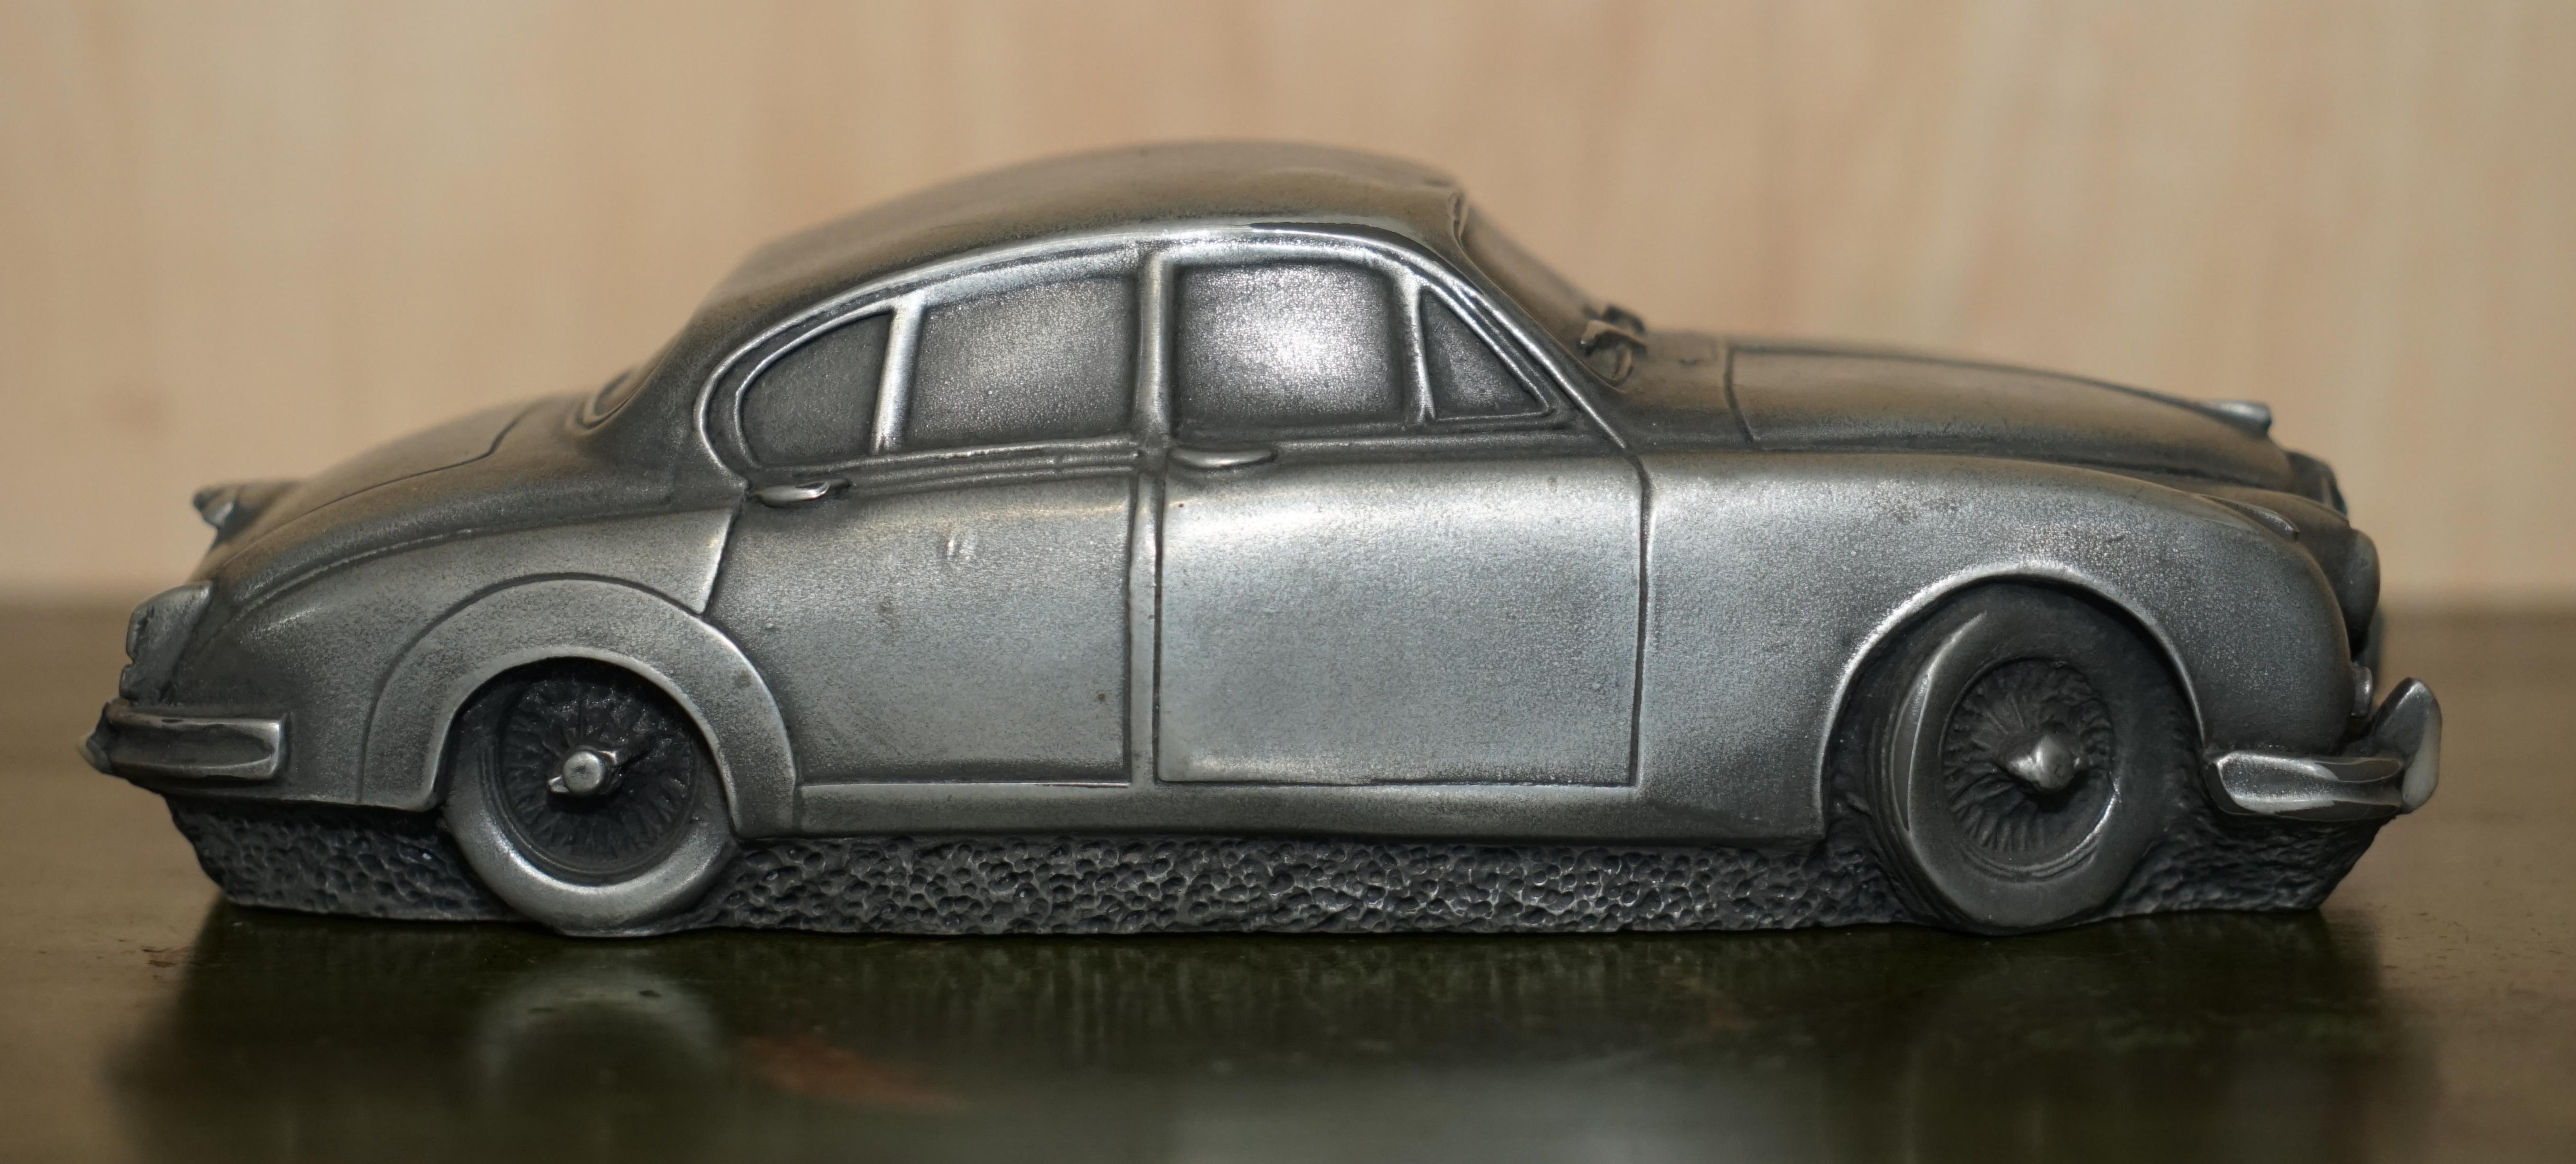 Compulsion Gallery Pewter Jaguar 1955-1959 Edition Mark i Car Must See Pictures For Sale 8